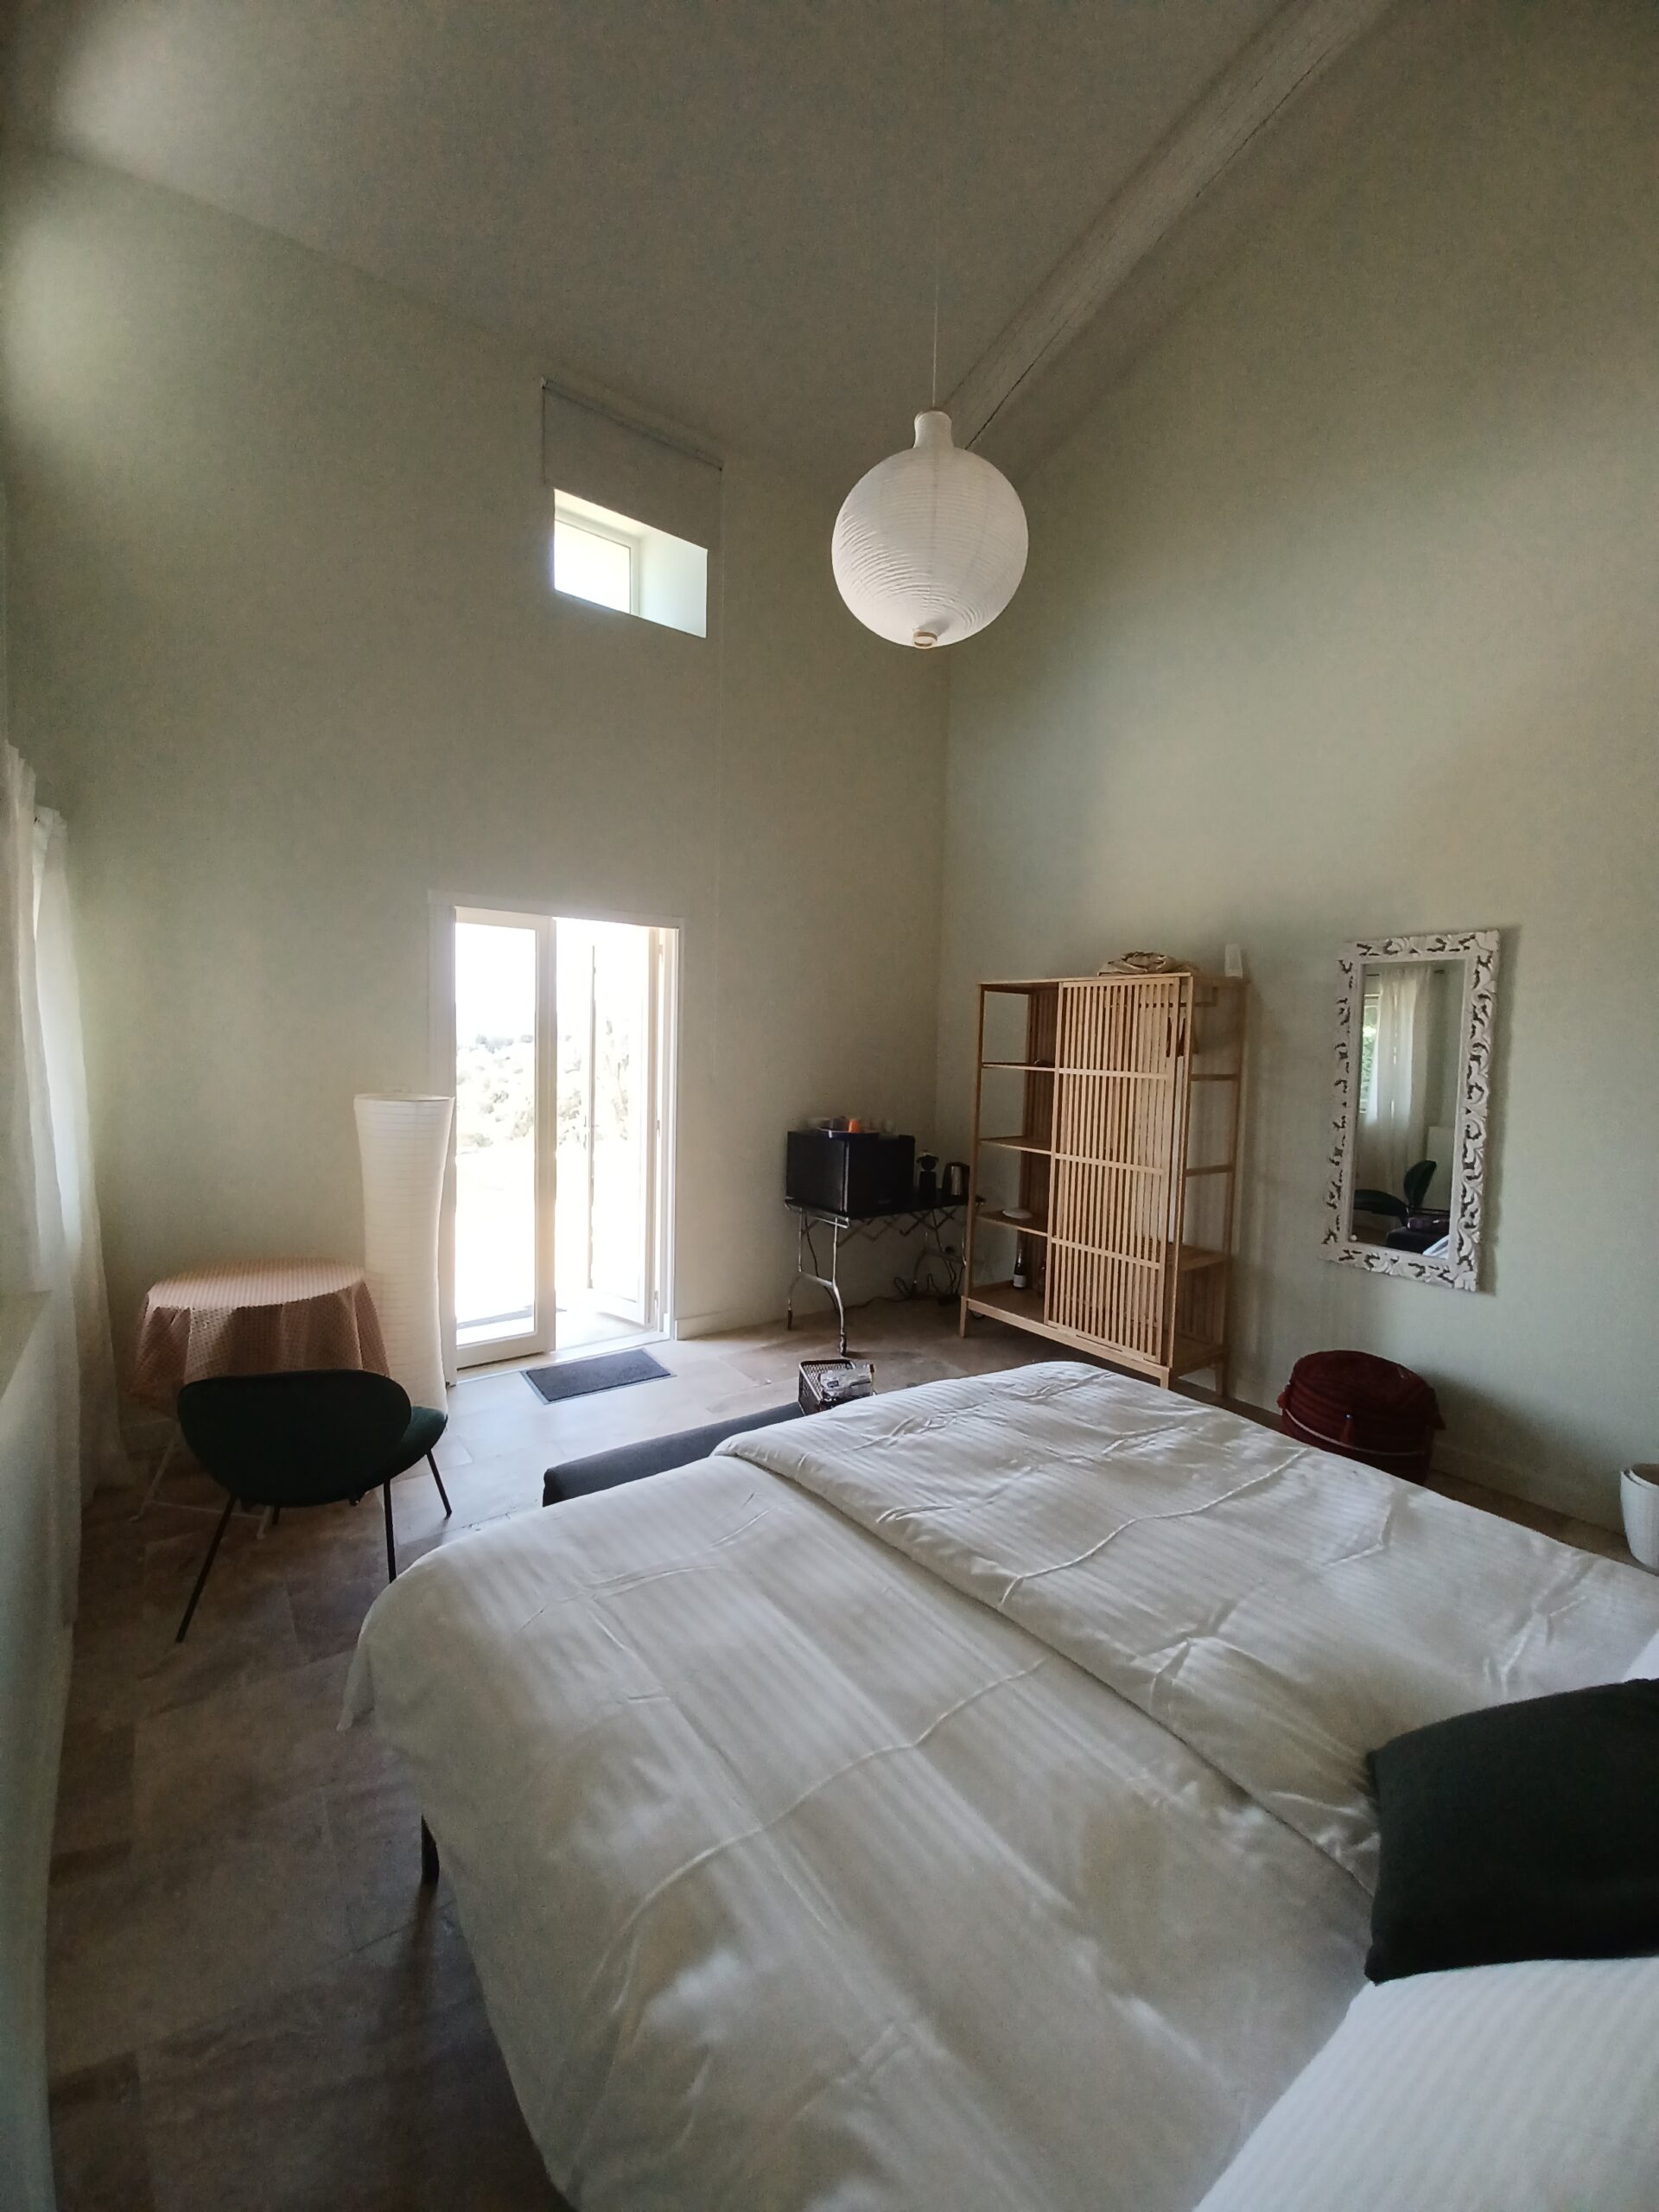 Double room "Olivier"